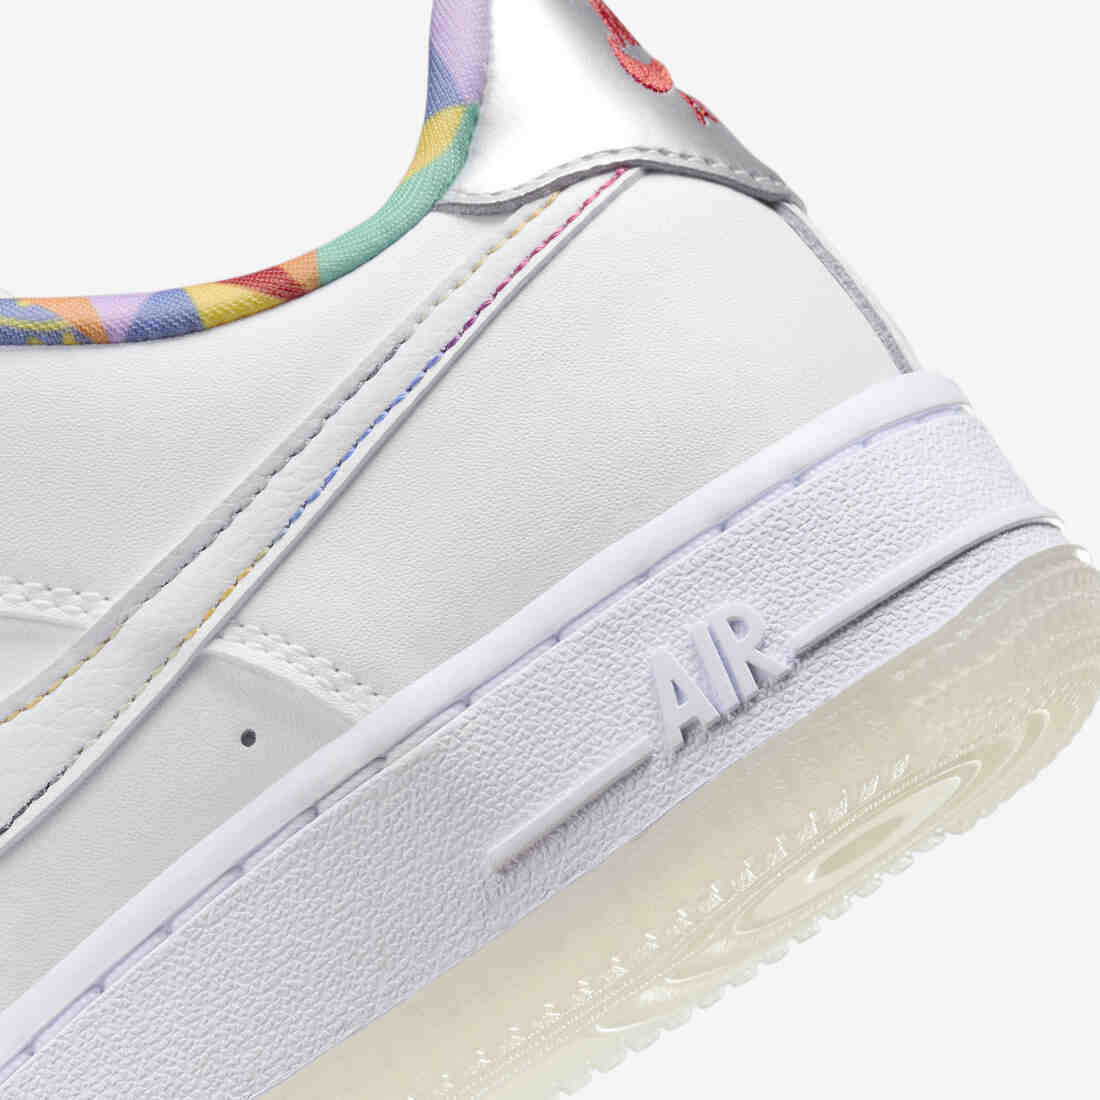 Nike Air Force 1 Low GS White Multi-Color FN8912-111